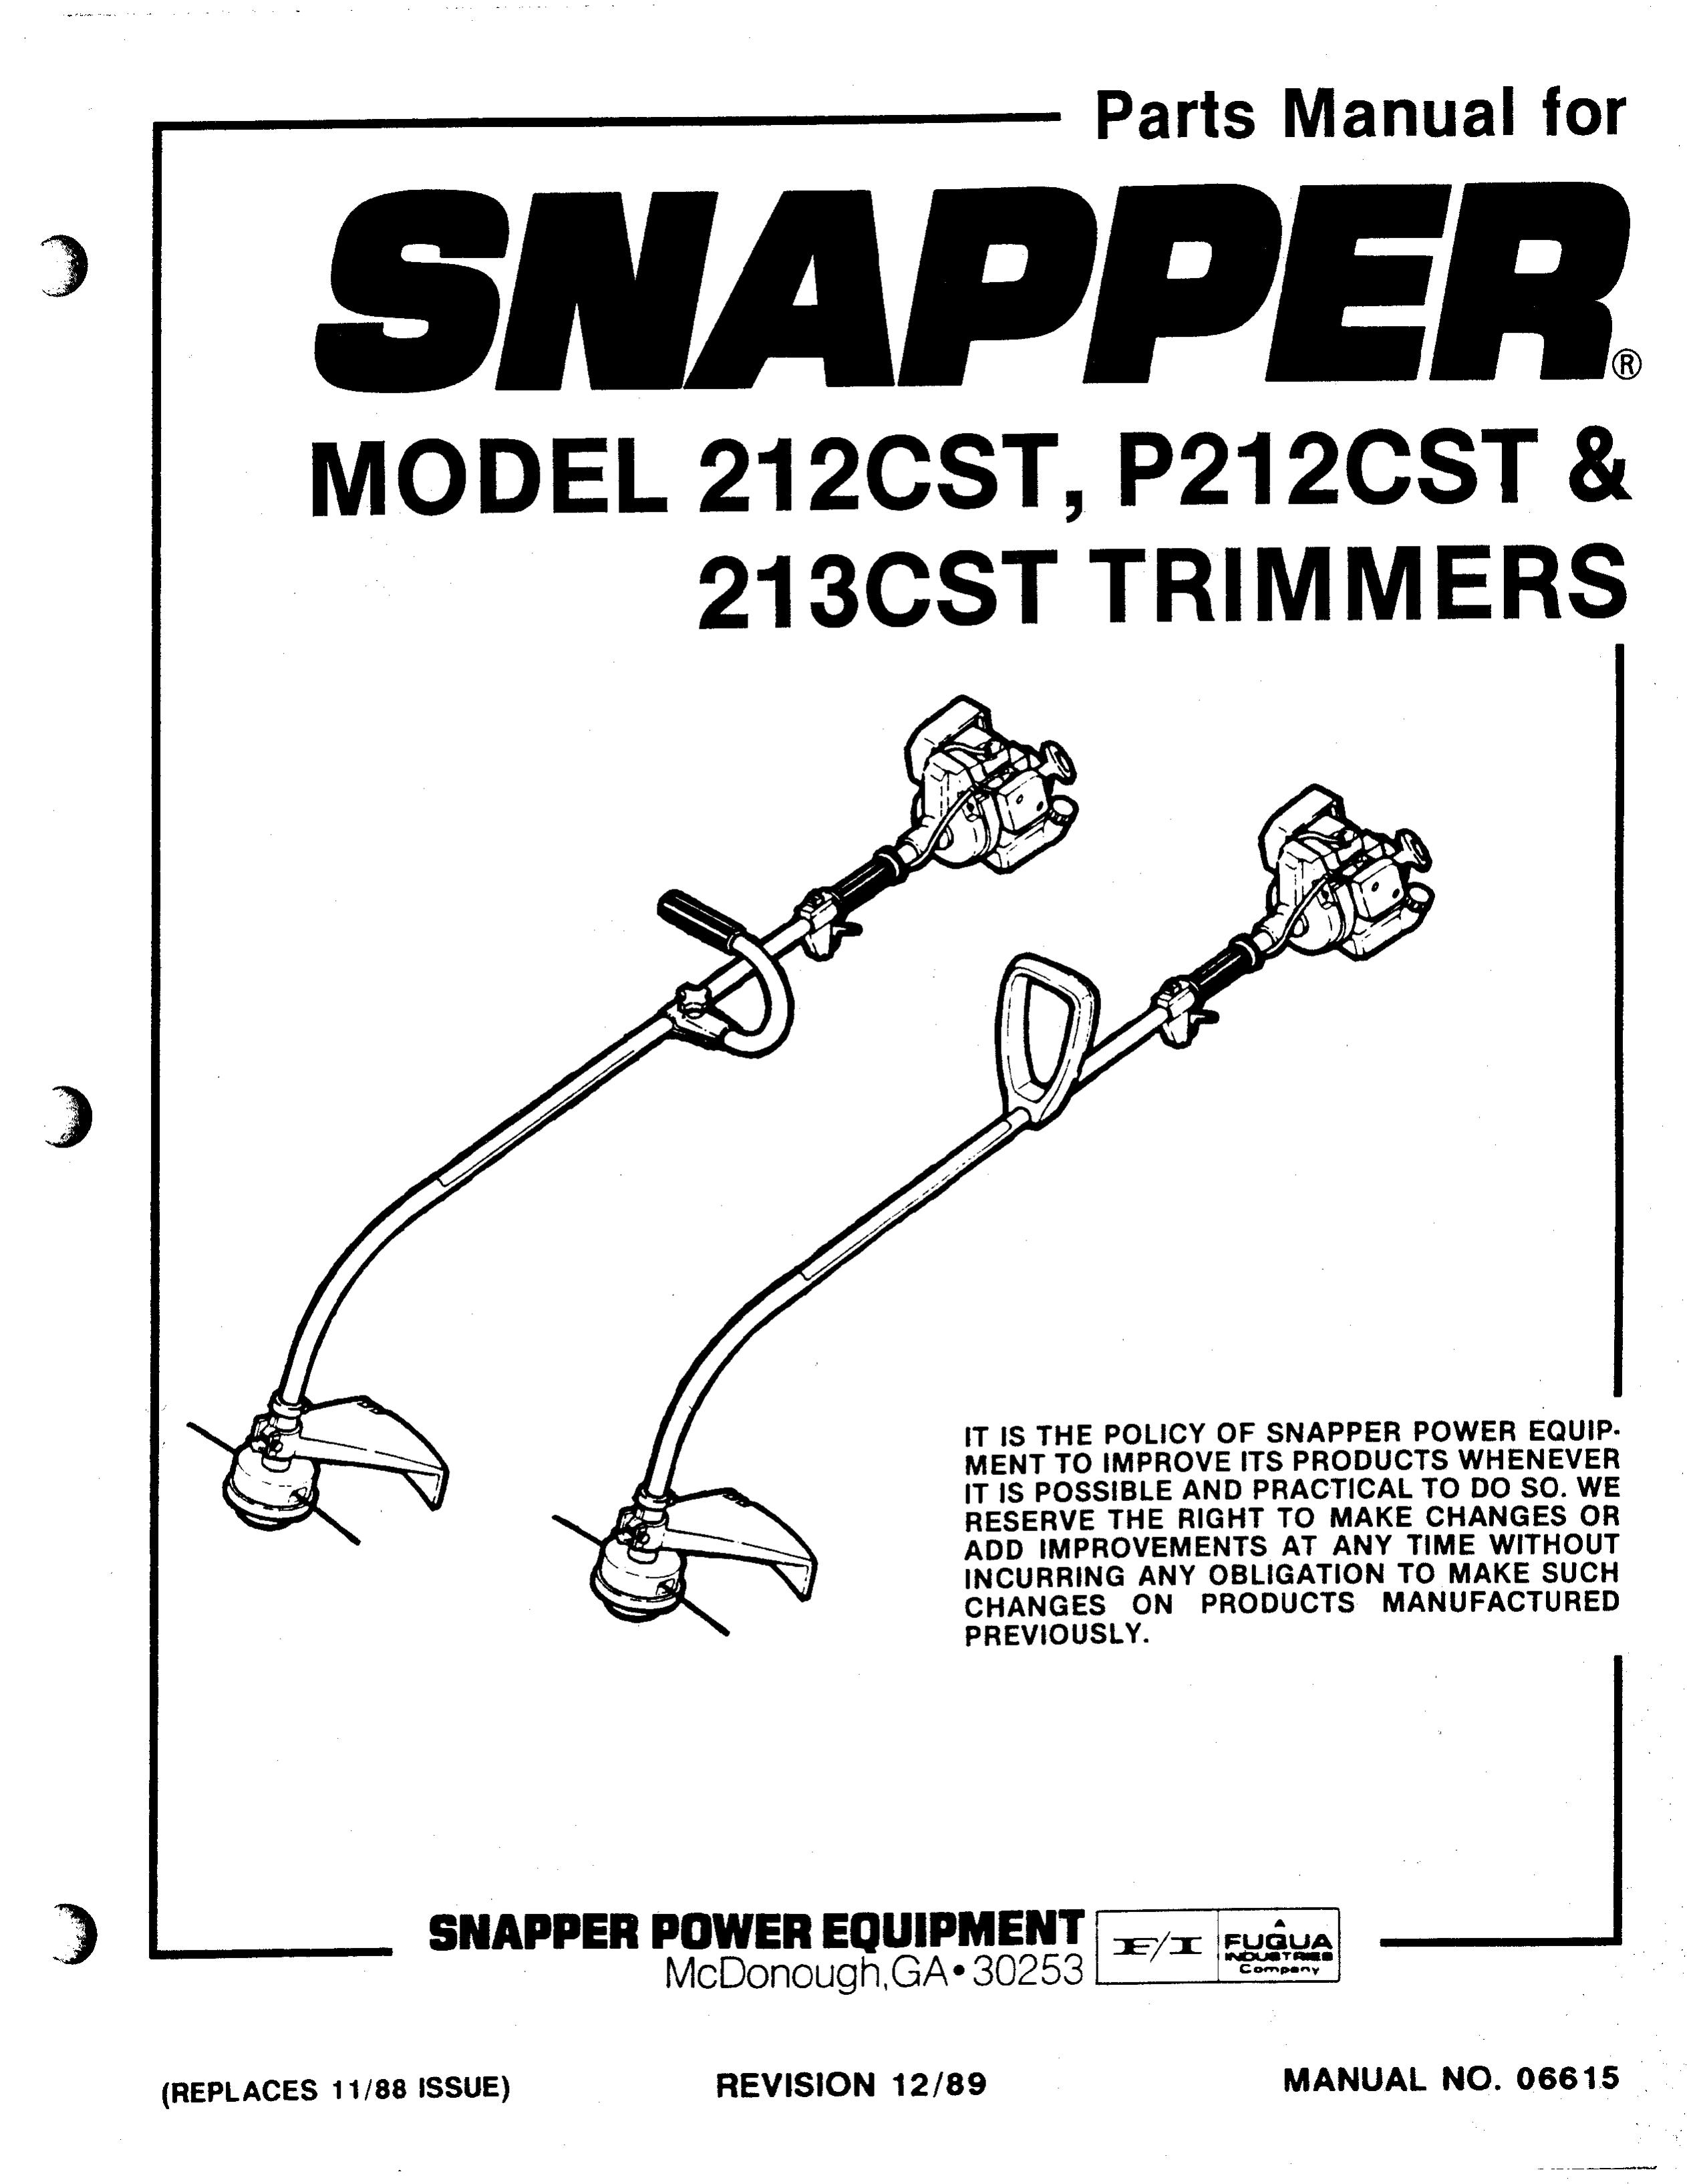 Snapper P212CST Trimmer User Manual